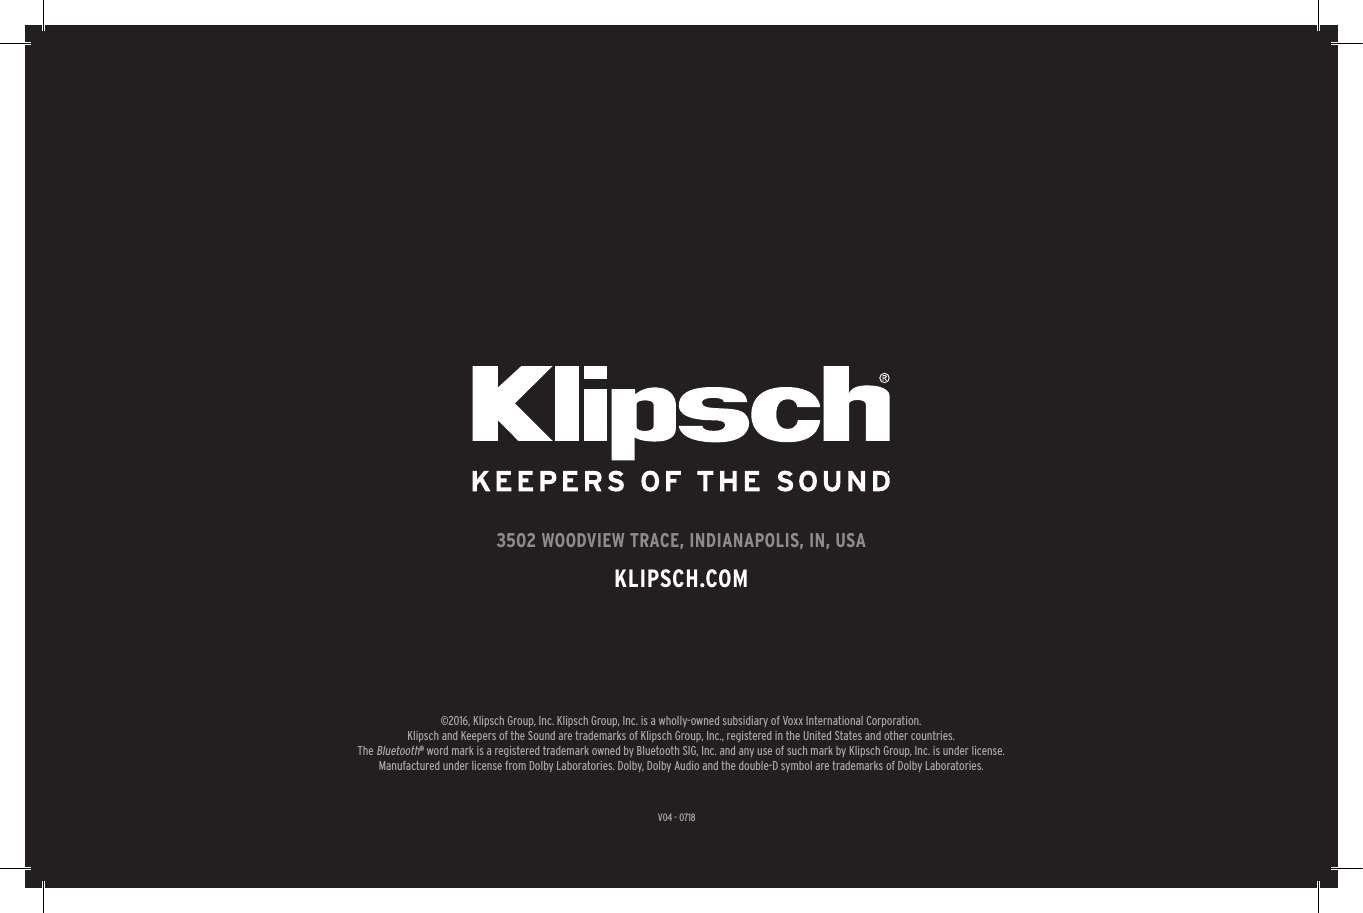 27V04 - 07183502 WOODVIEW TRACE, INDIANAPOLIS, IN, USAKLIPSCH.COM©2016, Klipsch Group, Inc. Klipsch Group, Inc. is a wholly-owned subsidiary of Voxx International Corporation.Klipsch and Keepers of the Sound are trademarks of Klipsch Group, Inc., registered in the United States and other countries.The Bluetooth® word mark is a registered trademark owned by Bluetooth SIG, Inc. and any use of such mark by Klipsch Group, Inc. is under license.  Manufactured under license from Dolby Laboratories. Dolby, Dolby Audio and the double-D symbol are trademarks of Dolby Laboratories.